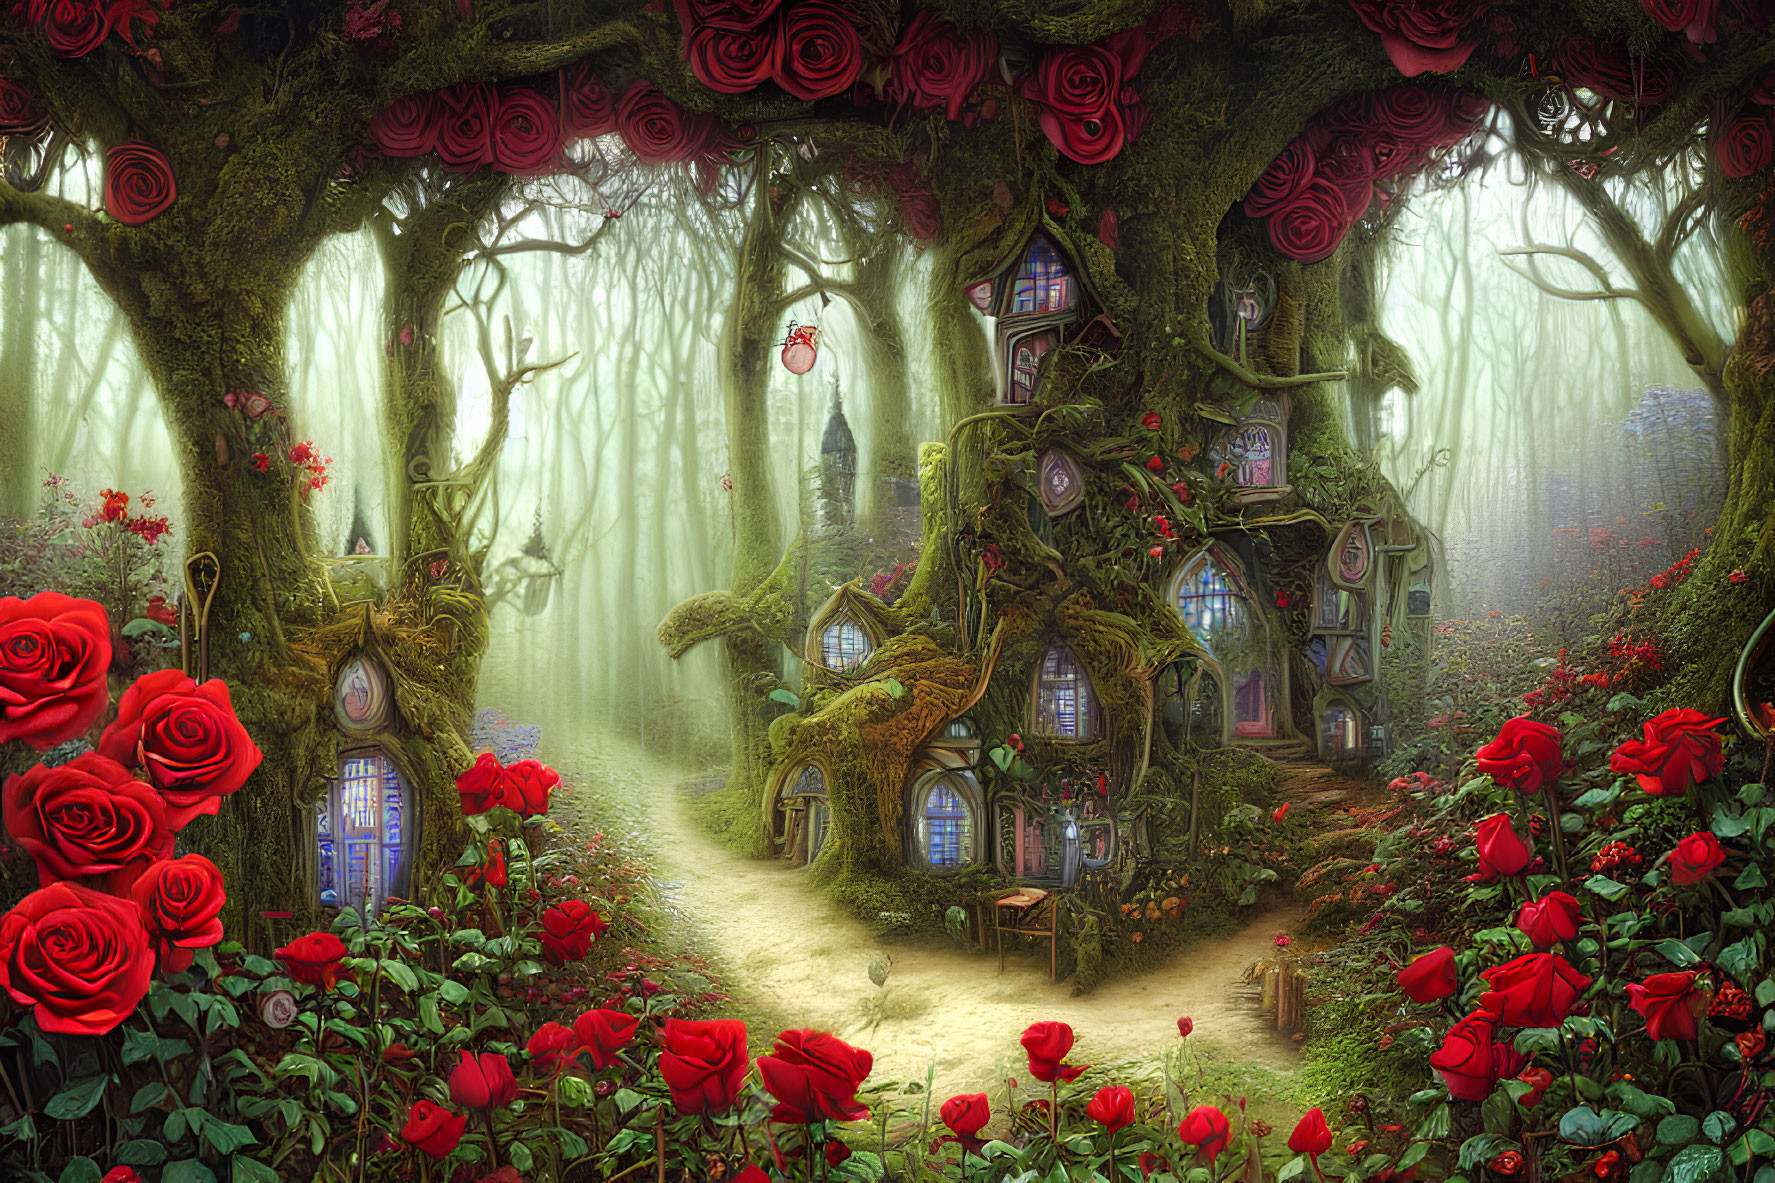 Whimsical treehouse in enchanted forest with roses and twisted trees